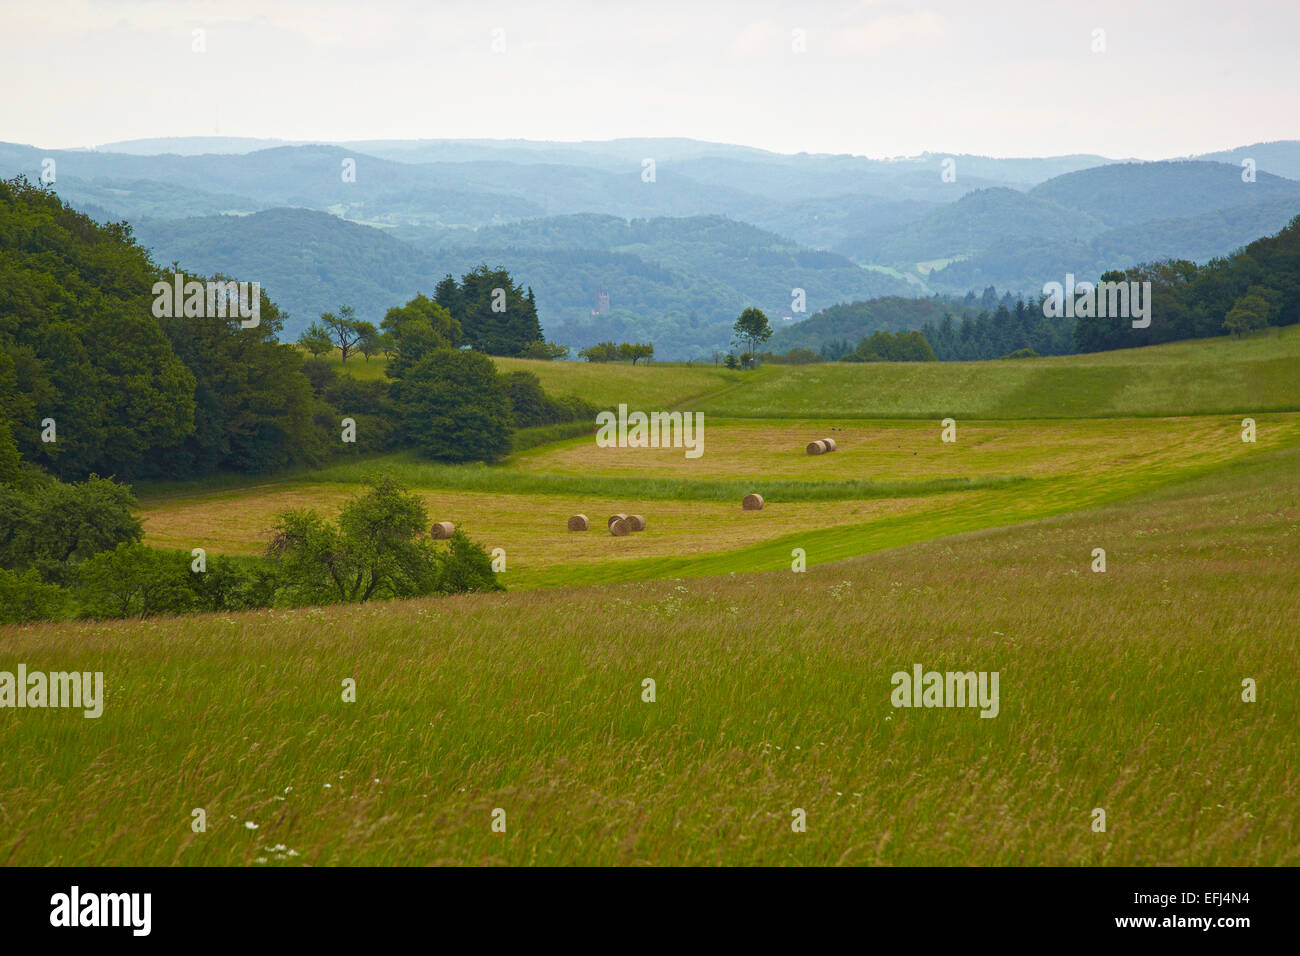 Landscape at the Korn-Berg near Donsbach, Rothaarsteig, Westerwald, Hesse, Germany, Europe Stock Photo